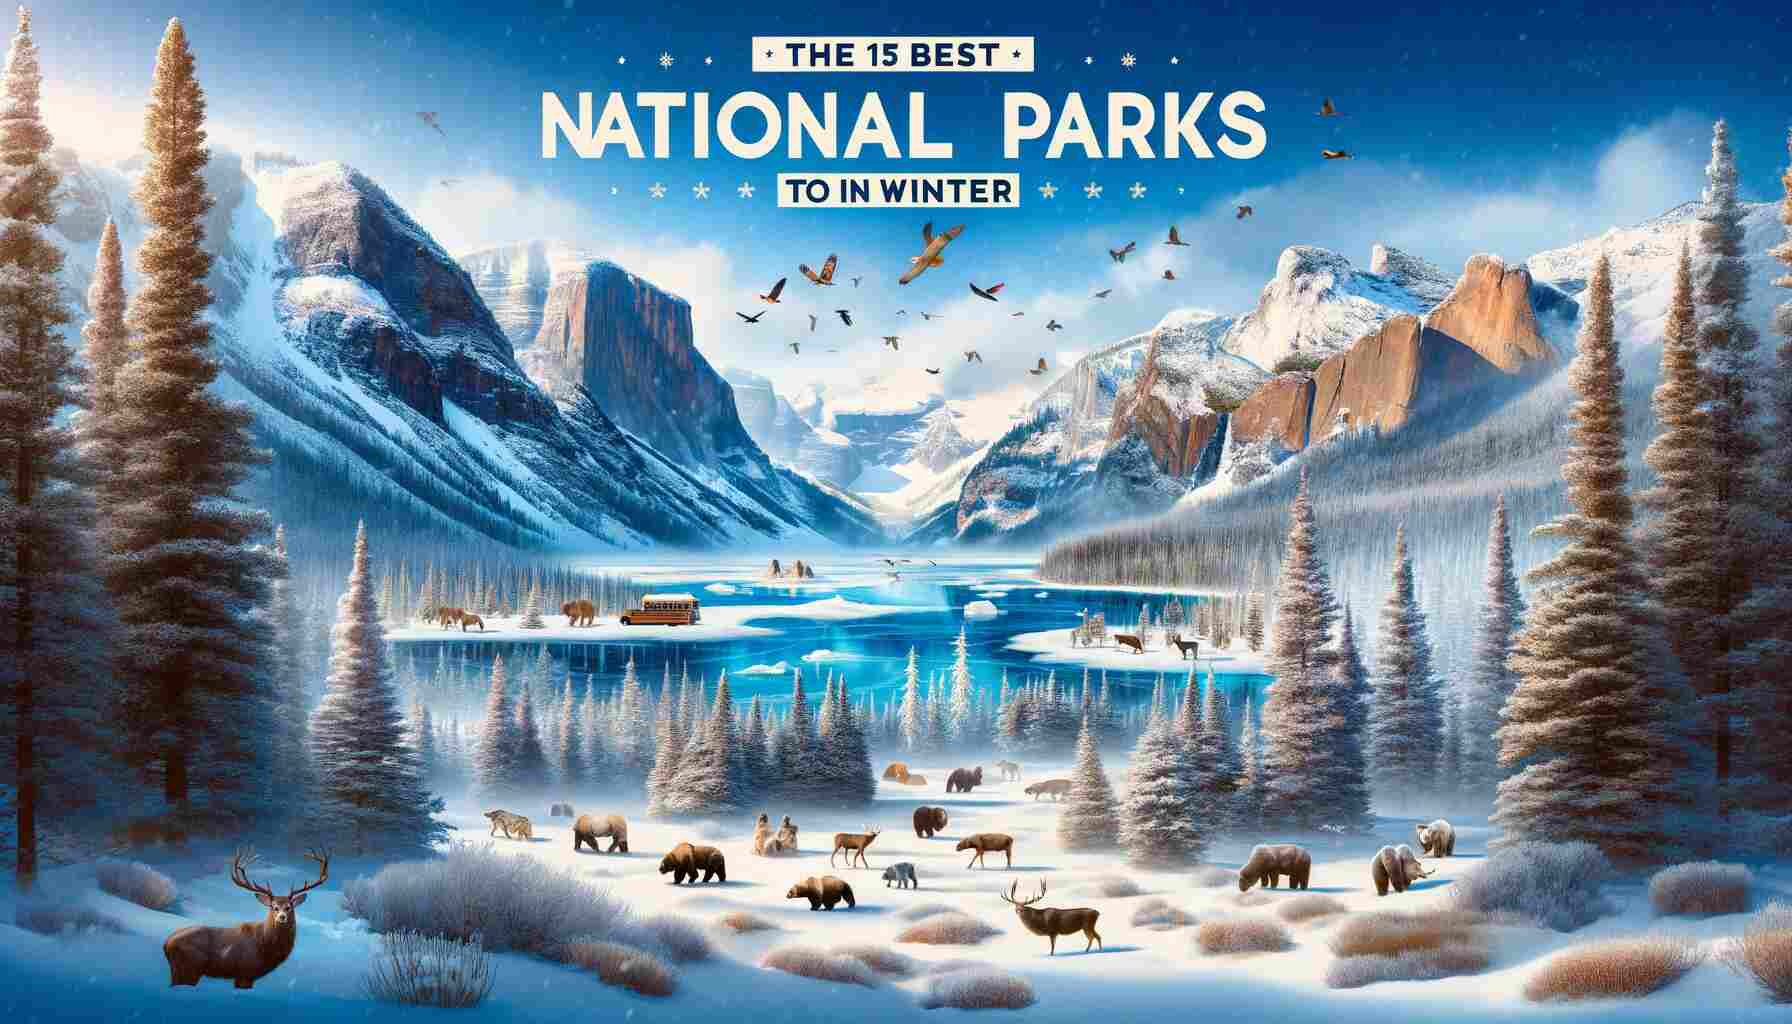 A panoramic winter landscape showcasing a montage of 15 national parks, each uniquely represented with snow-covered landmarks like mountains, frozen lakes, forests, and wildlife. The title "The 15 Best National Parks to Visit in Winter" is elegantly inscribed in the sky above the scenic snowy vista.